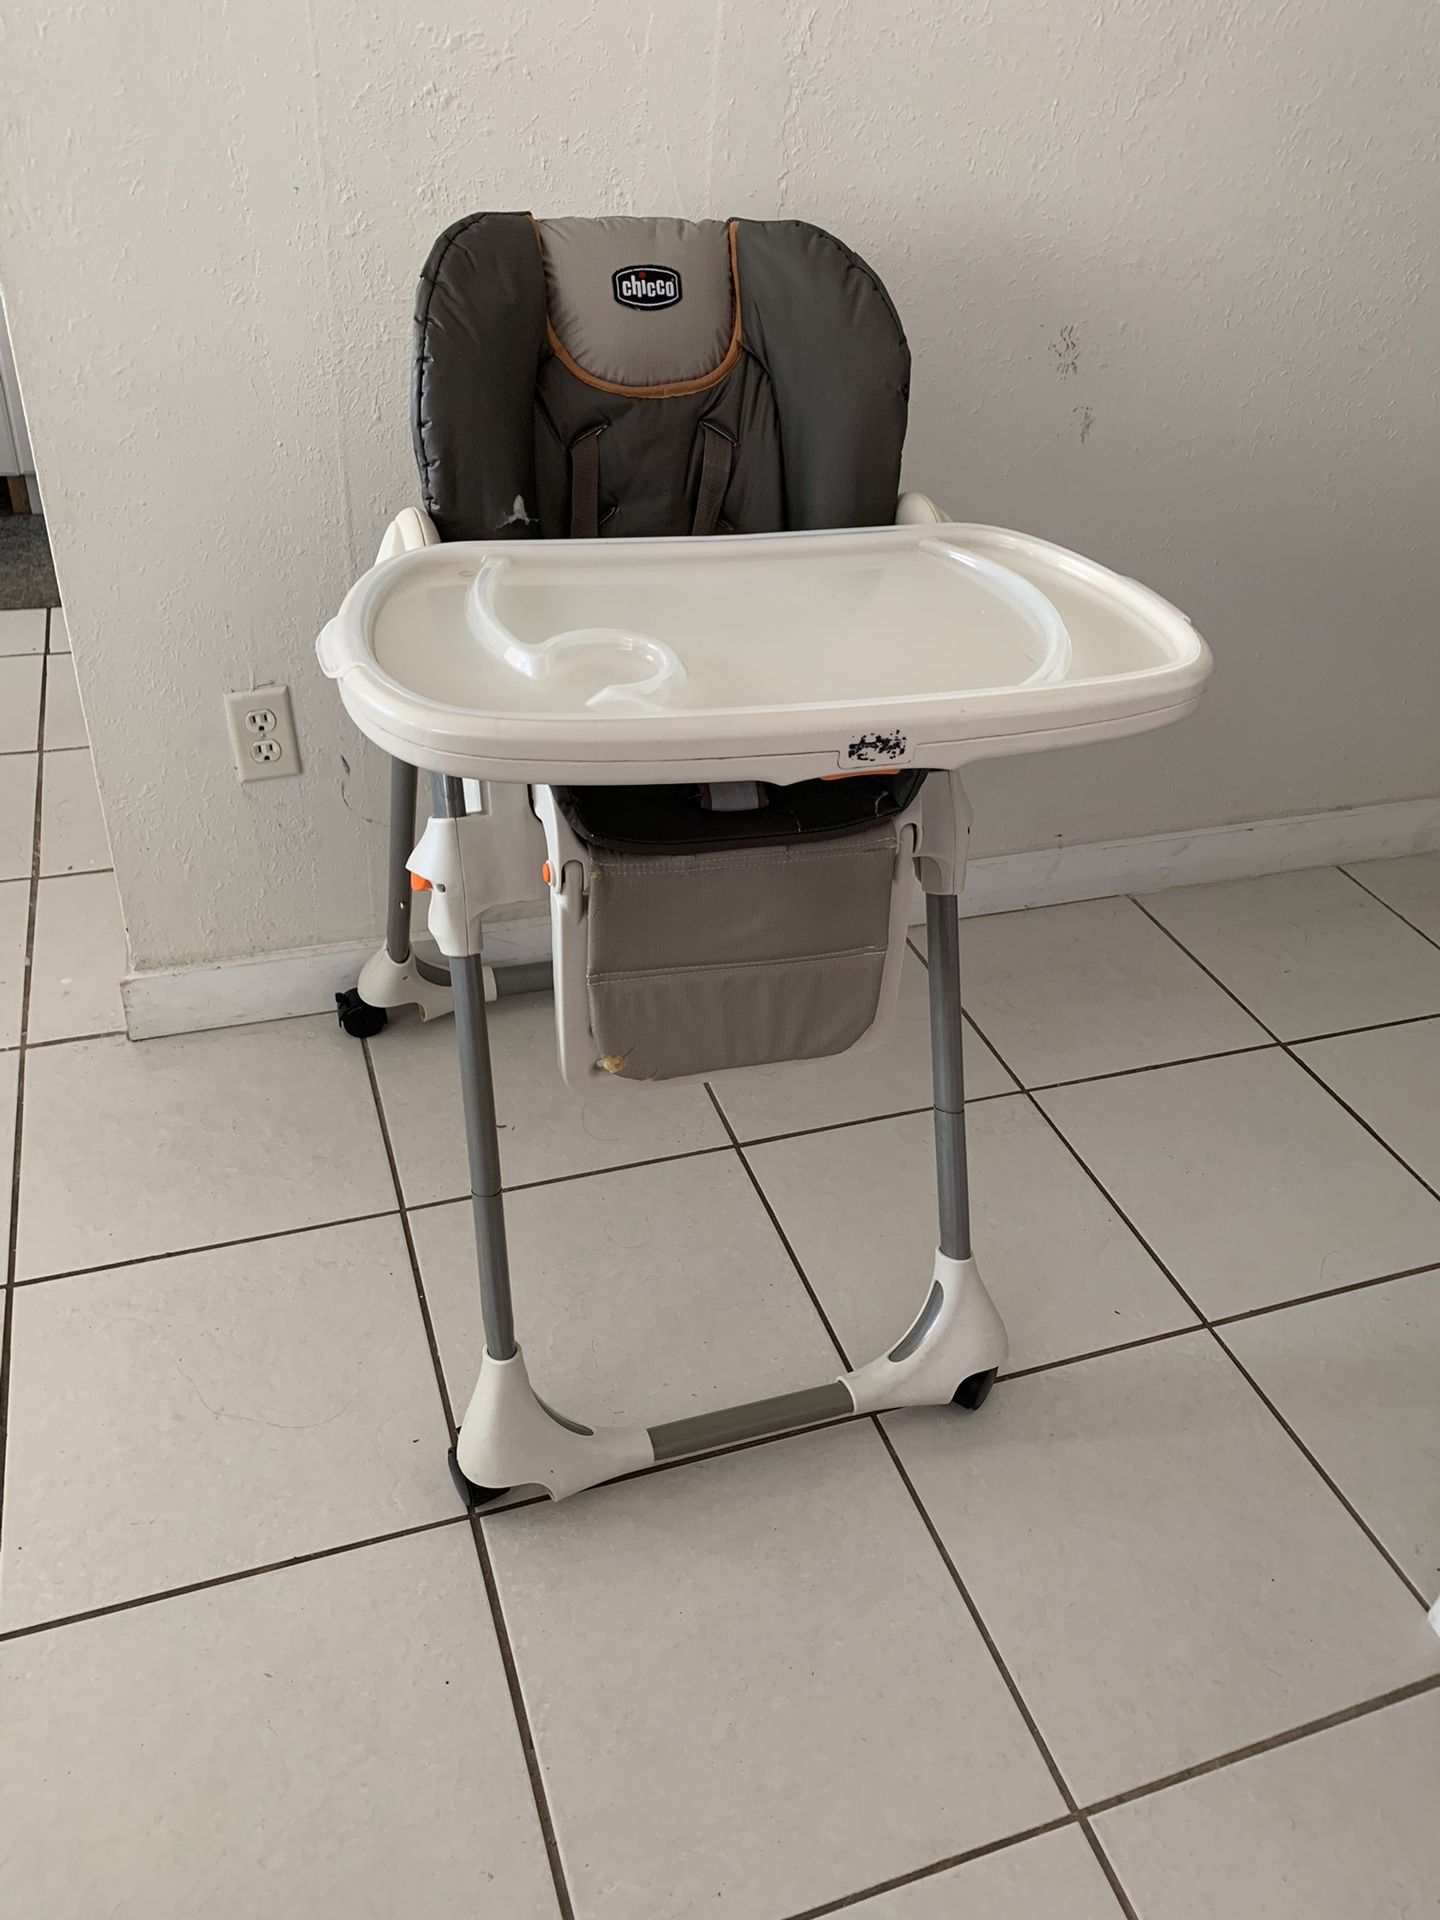 Chicco high chair there are some parts that are a little worn but still good